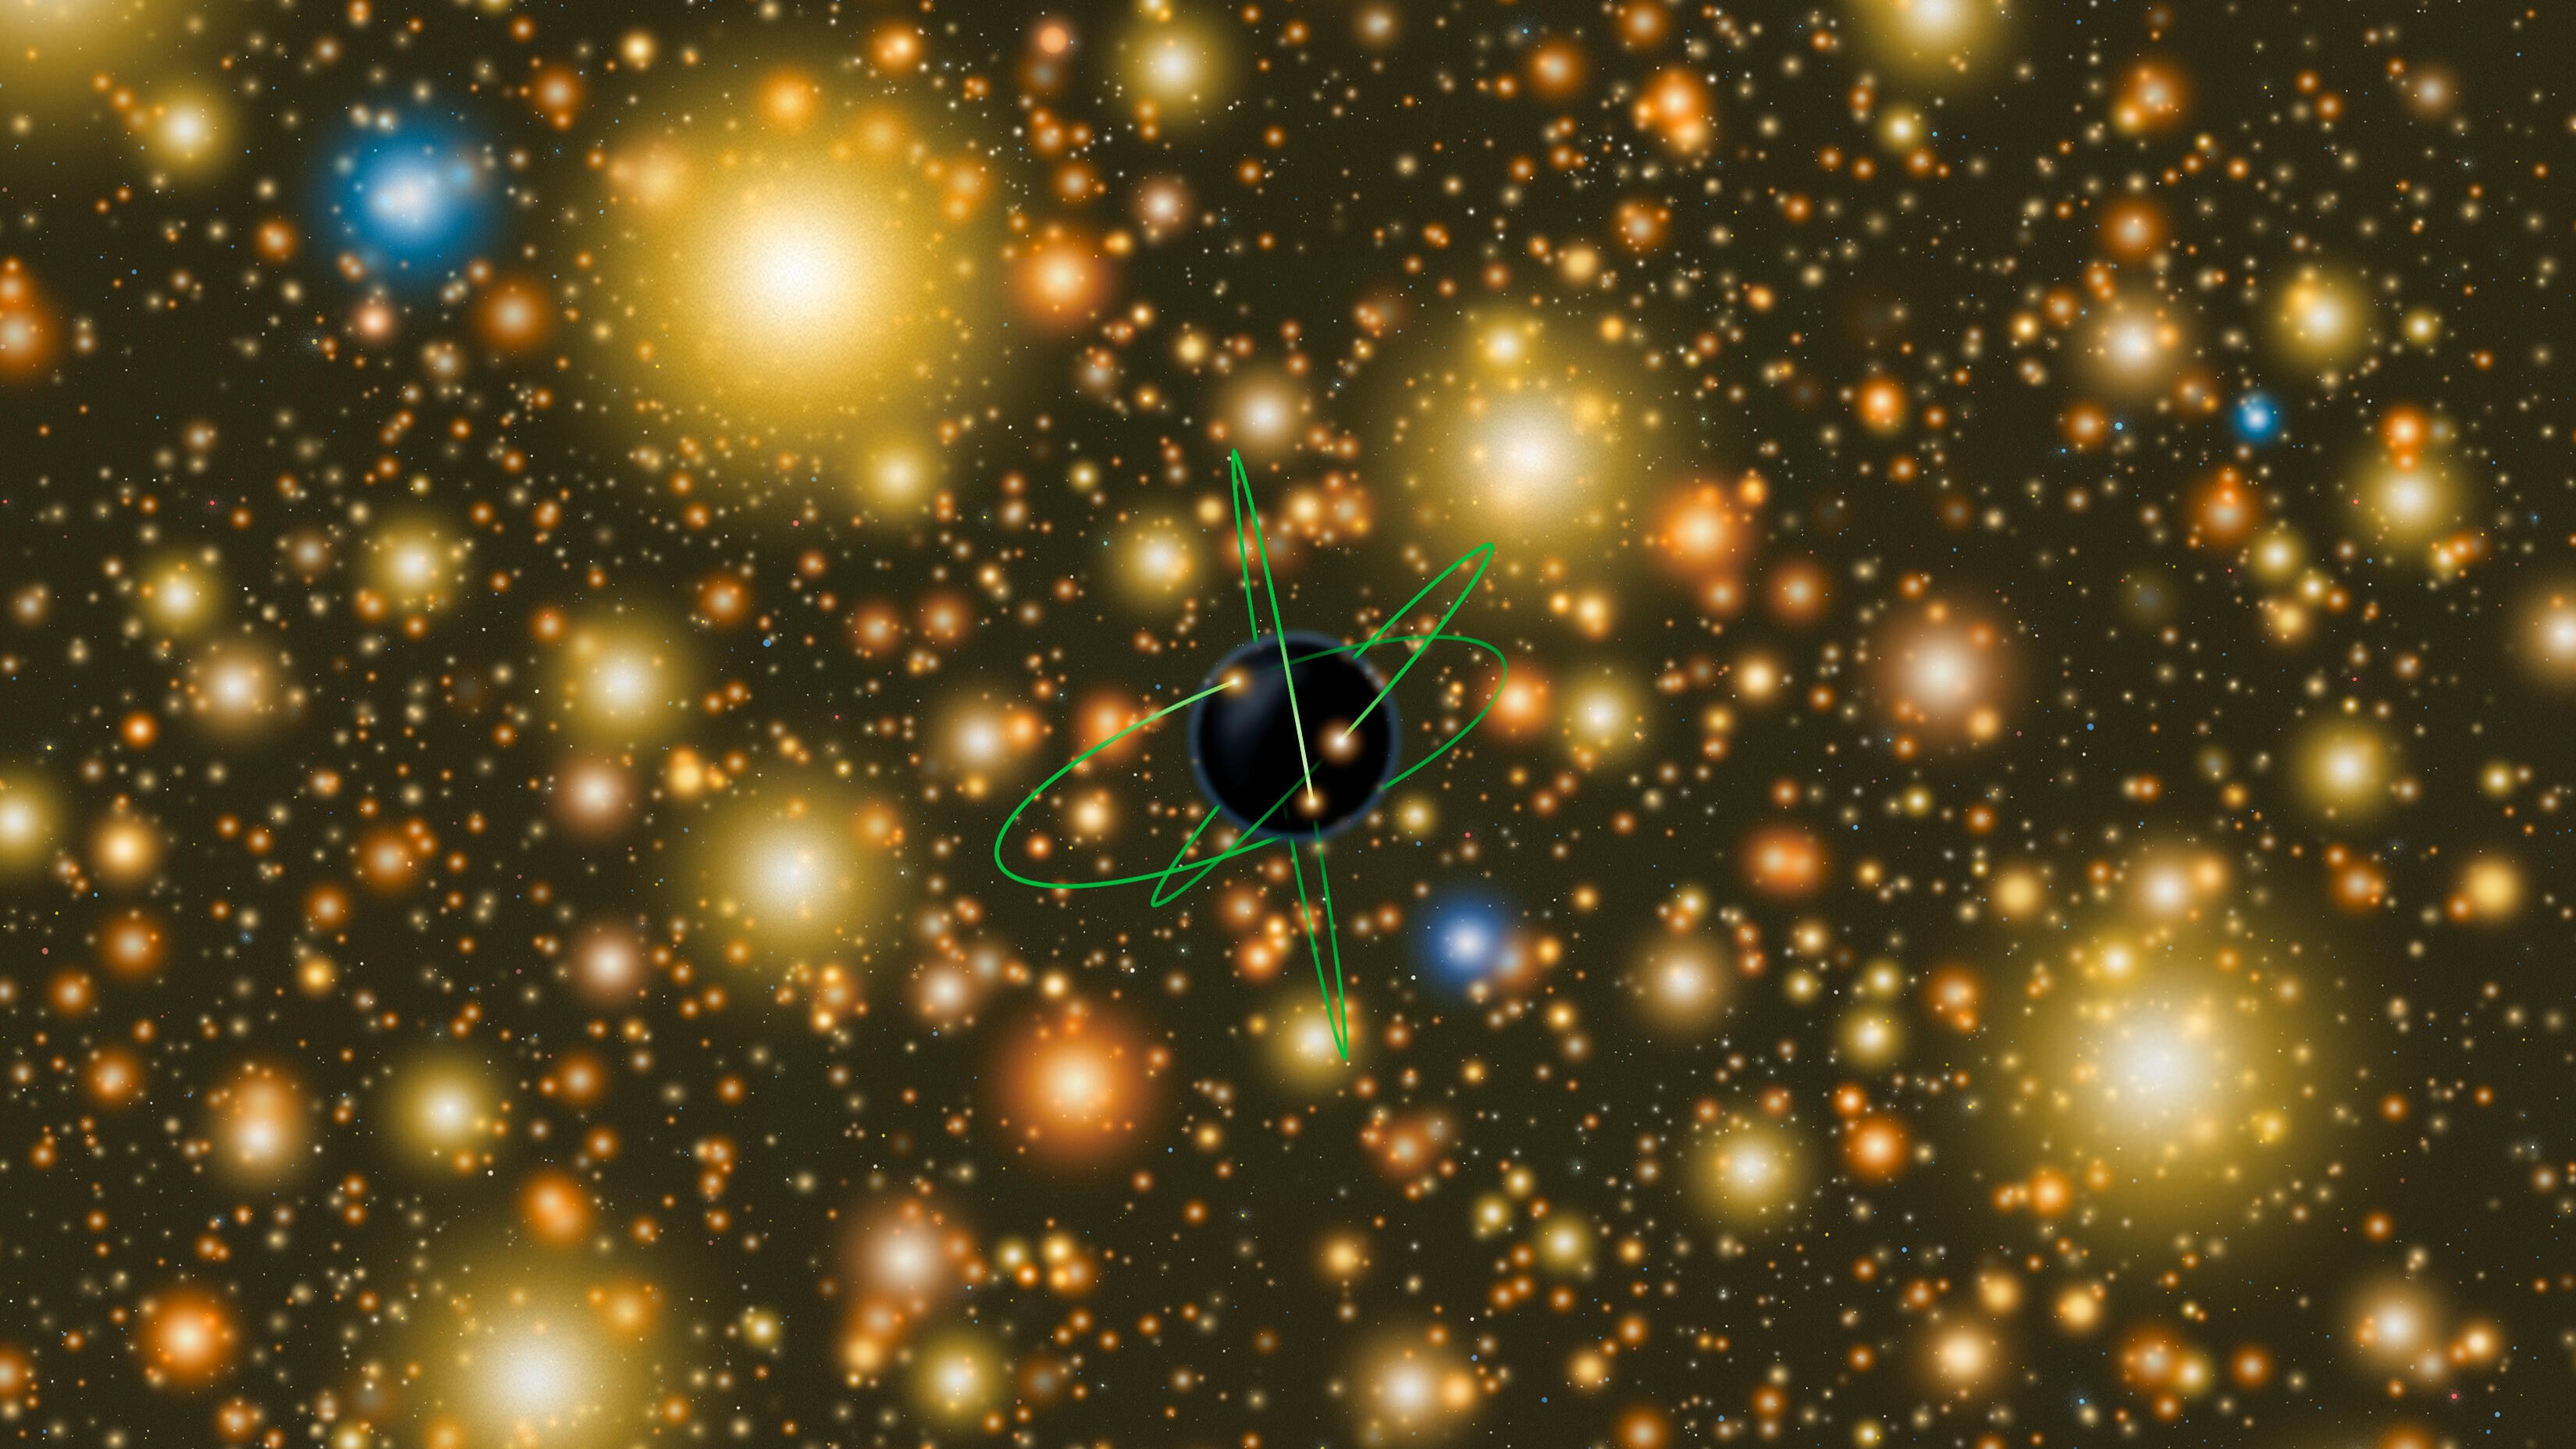 An illustration of a black hole surrounded by countless colorful stars in space, with several green lines indicating orbital paths around the black hole.